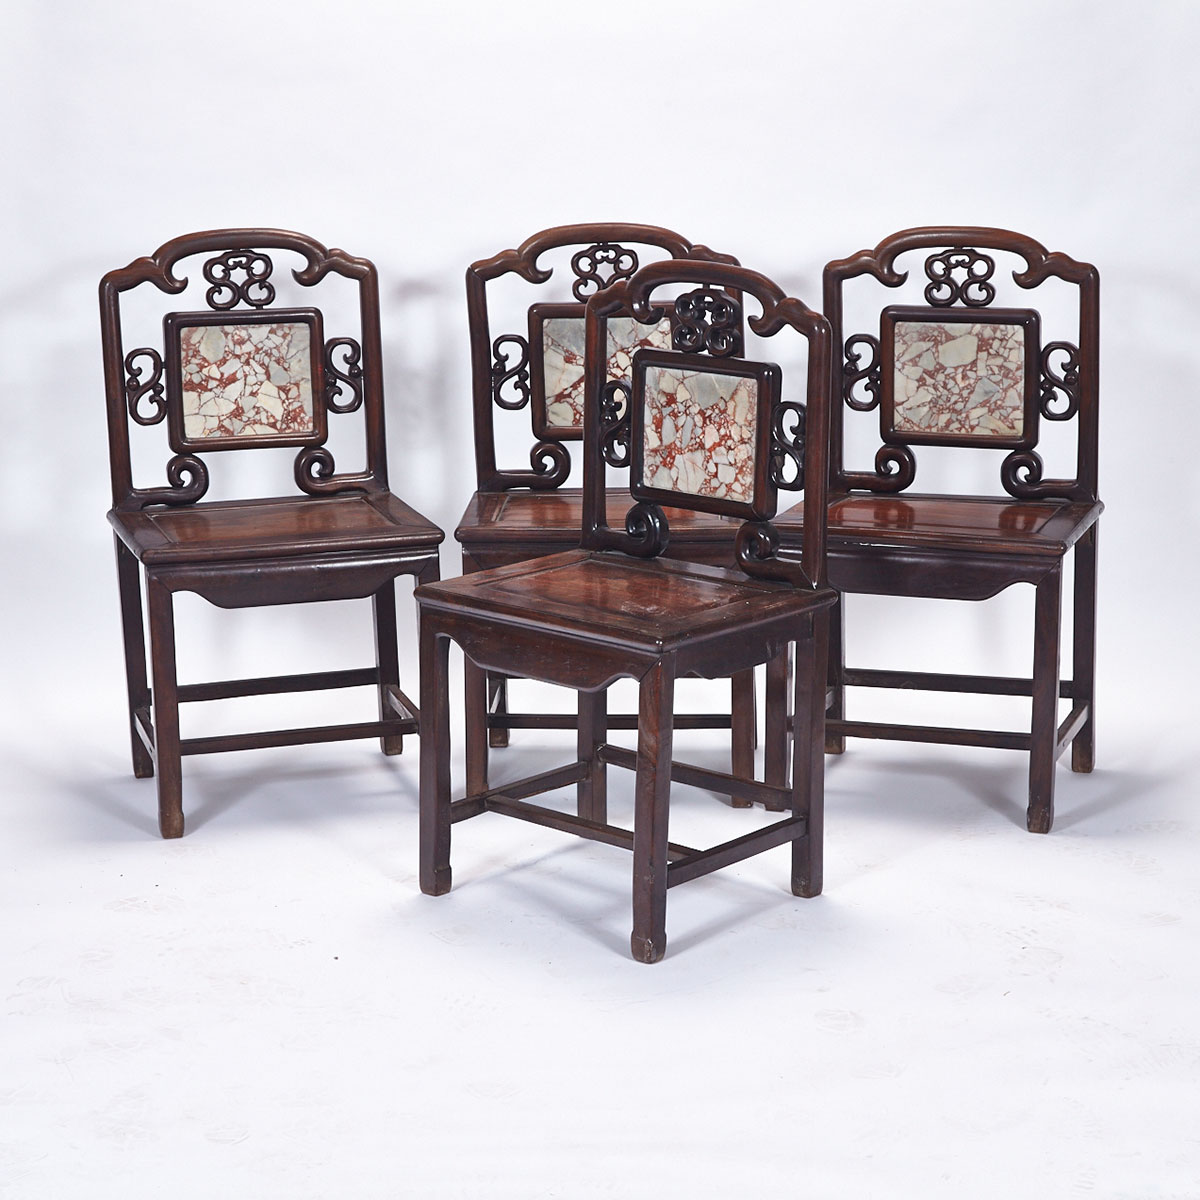 Four Rosewood and Marble Inlay Armchairs, Mid-20th Century